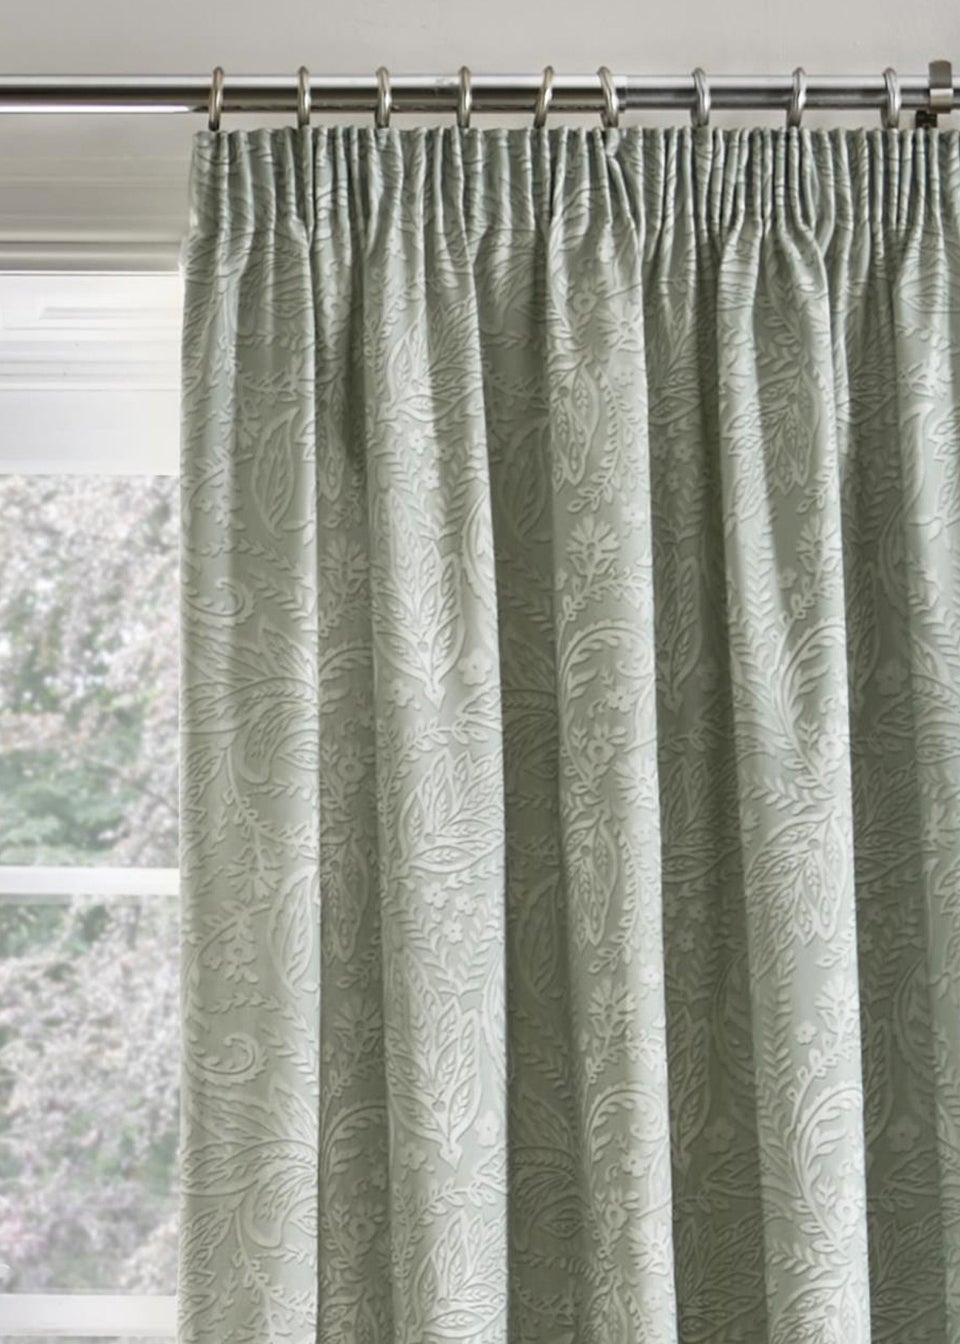 Dreams & Drapes Aveline Green Pencil Pleat Curtains With Tie-Backs